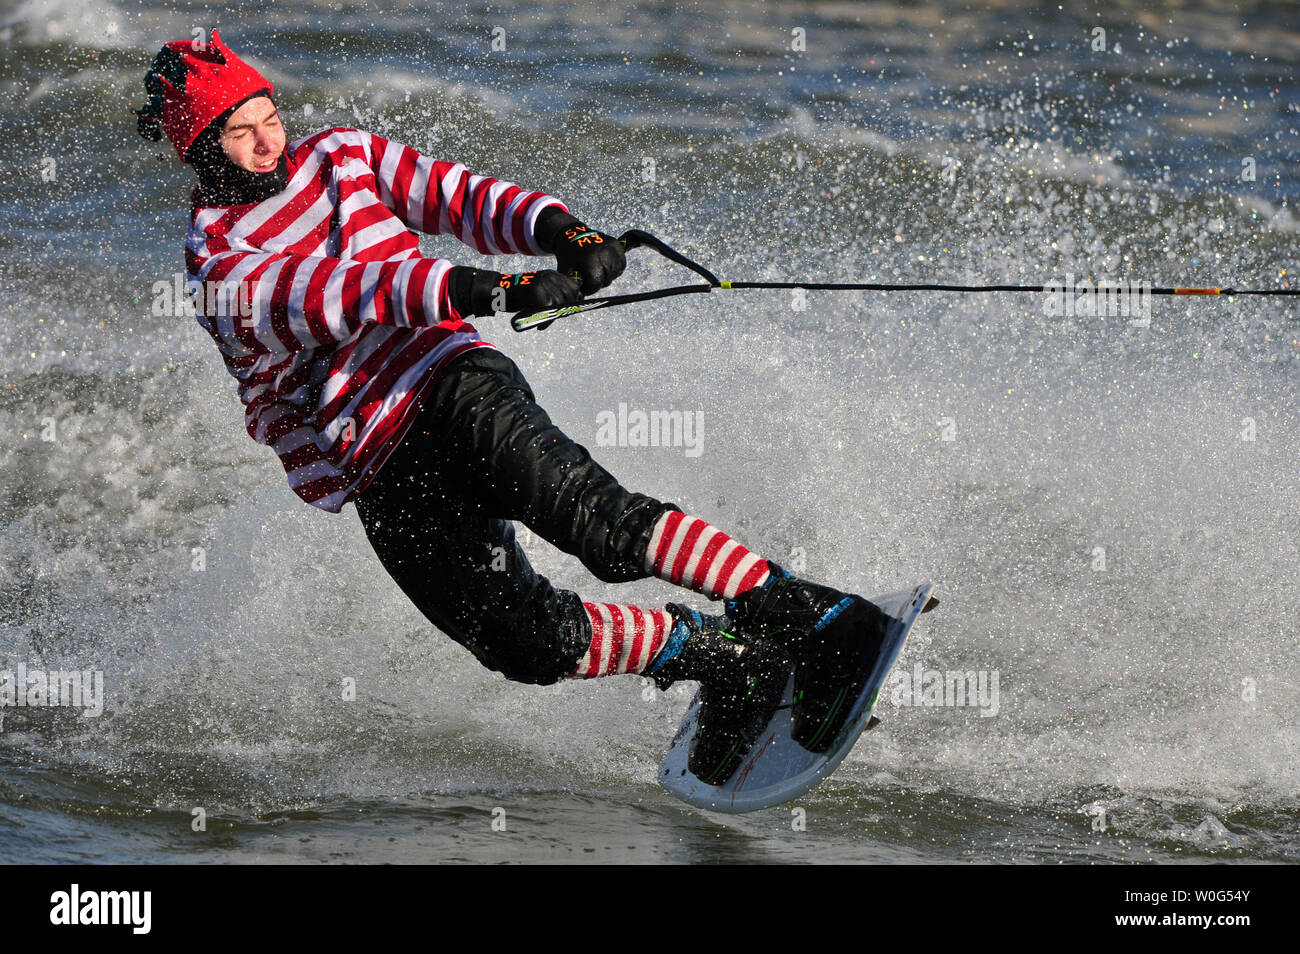 A wakeboarder dressed as an elf performs during the 25th annual Water-Skiing Santa show on the Potomac River at the National Harbor in Maryland on December 24, 2010.  UPI/Kevin Dietsch Stock Photo